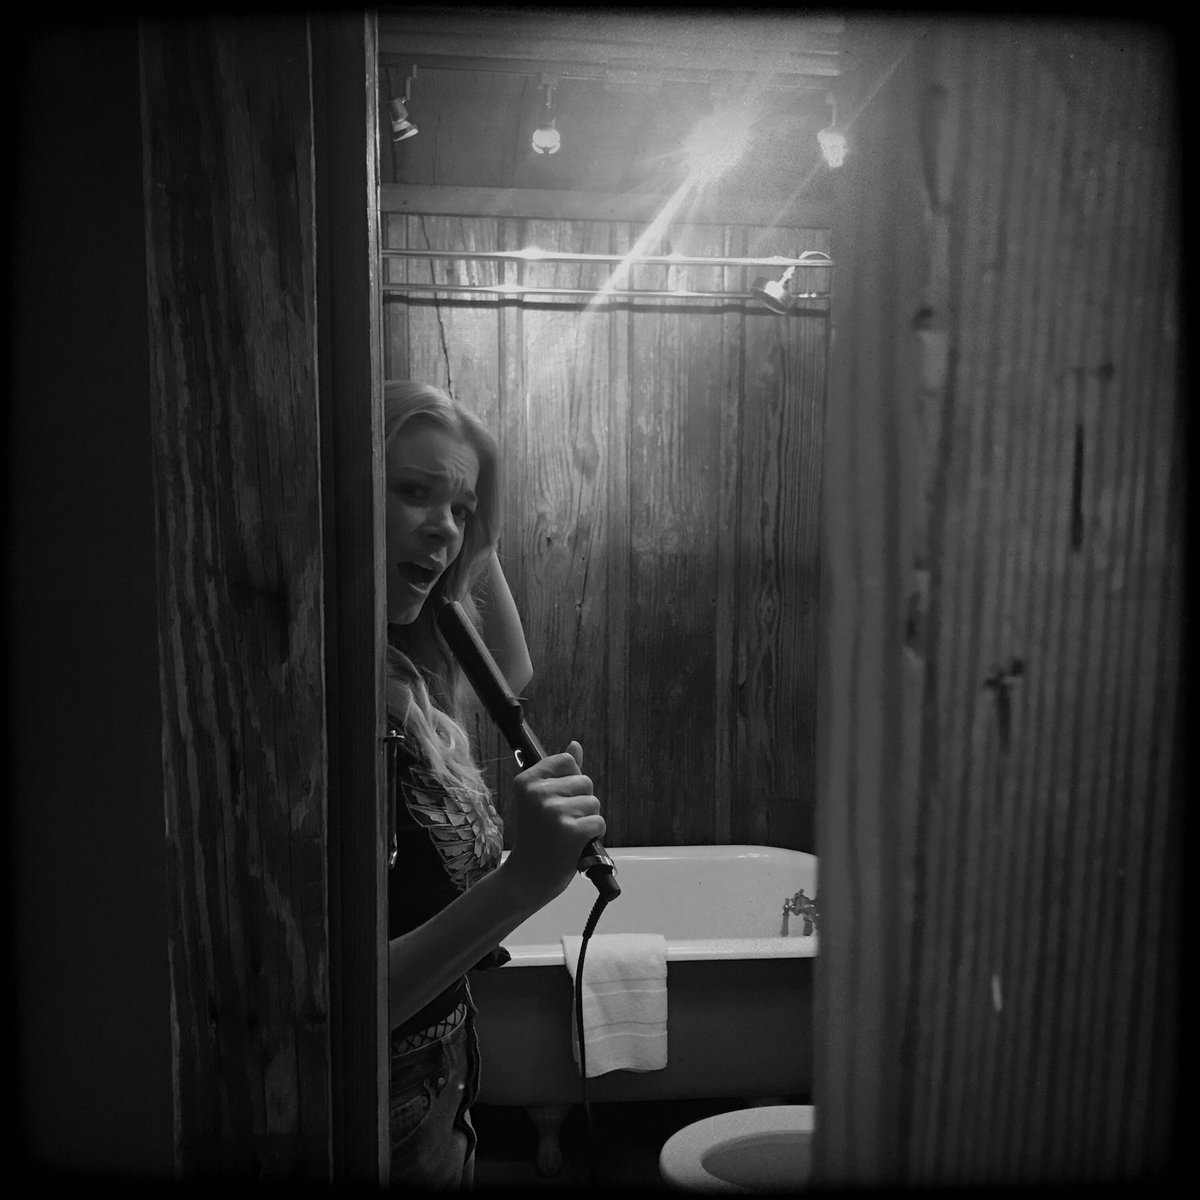 #BehindTheStage New Braunfels, TX 03.11.17 #lrlive2017 https://t.co/unblTByHad